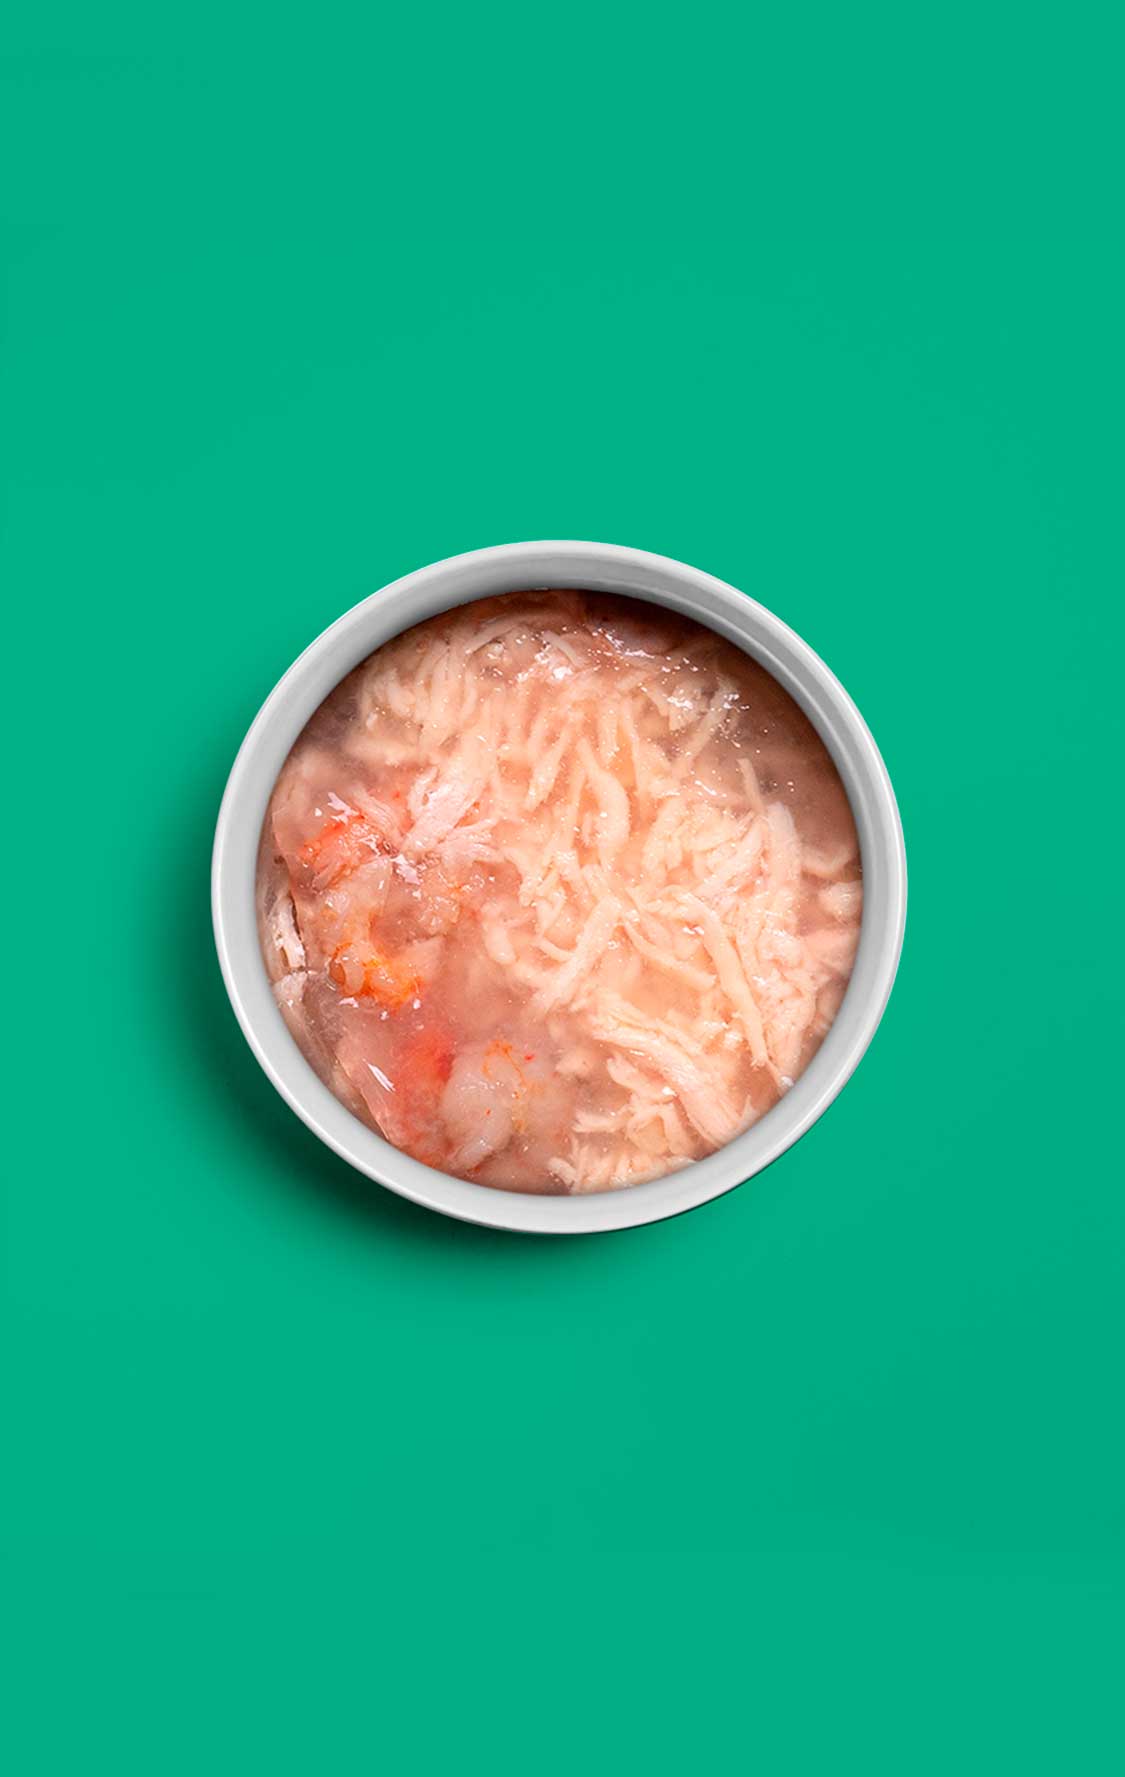 06 In jelly - Chicken & Shrimps - 70g